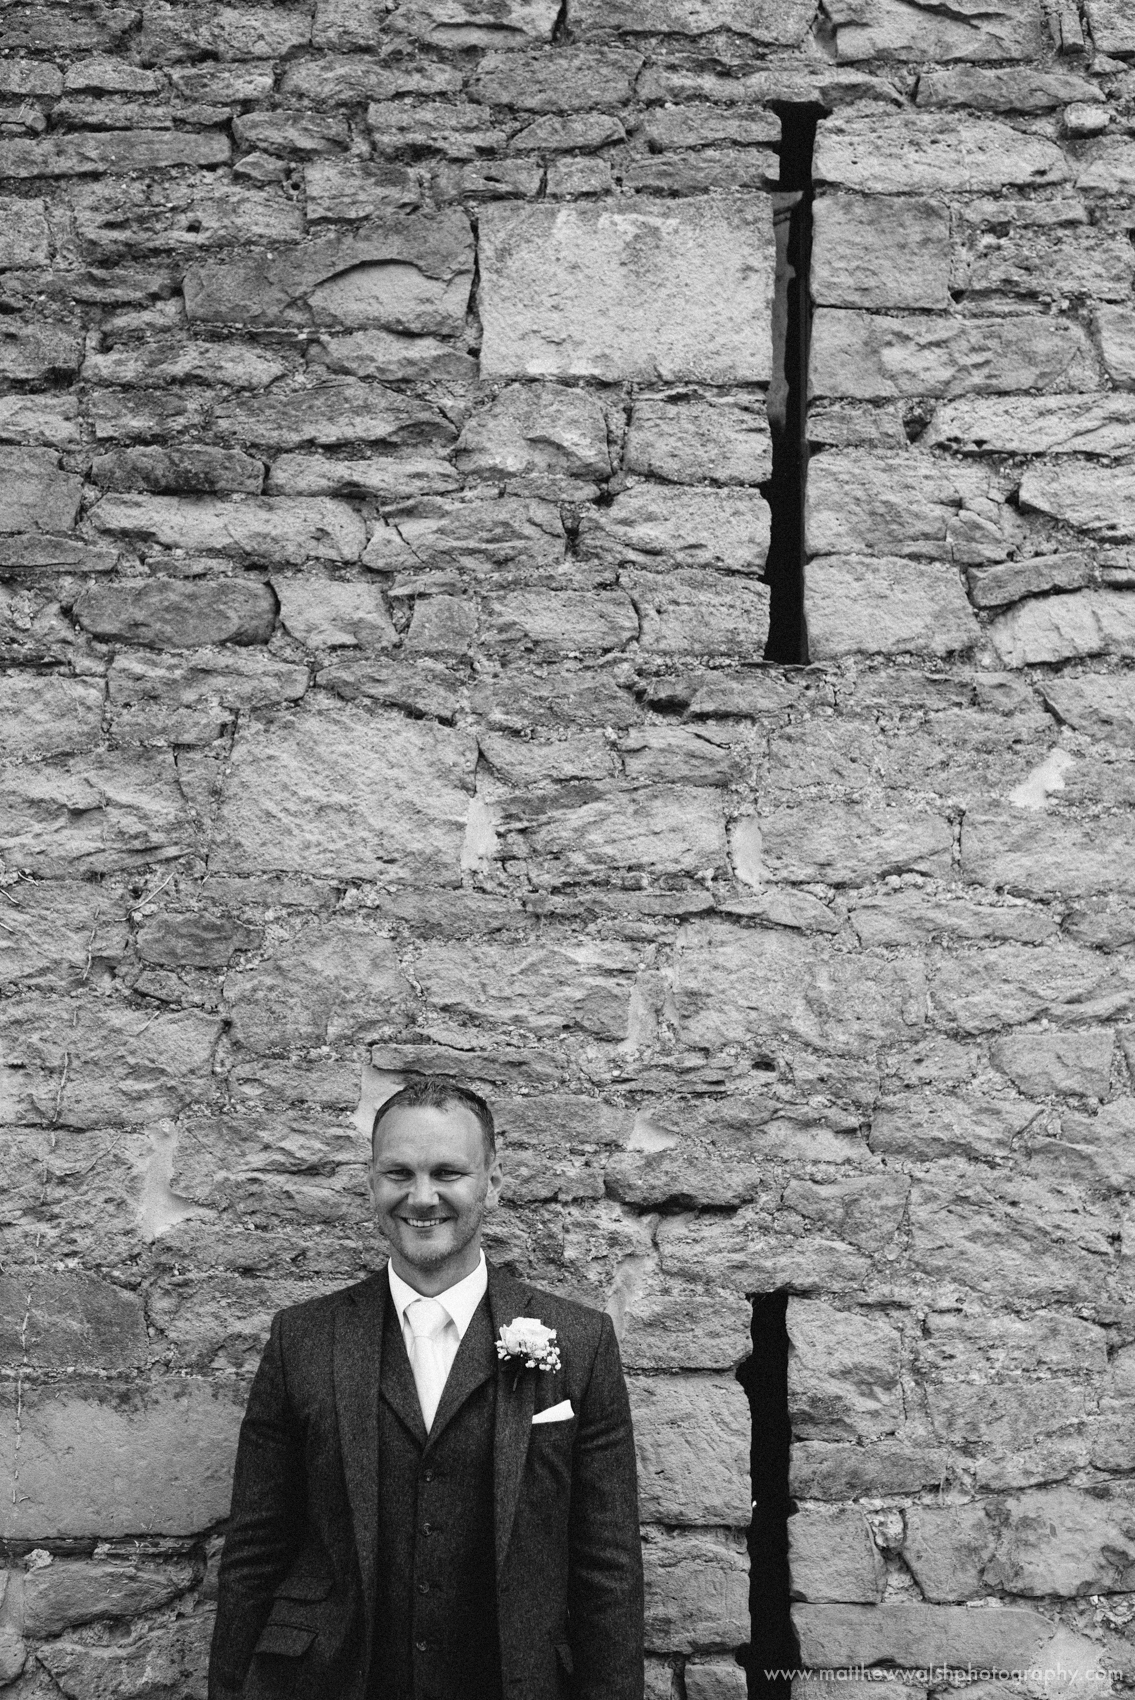 A favourite negative space portrait of the groom